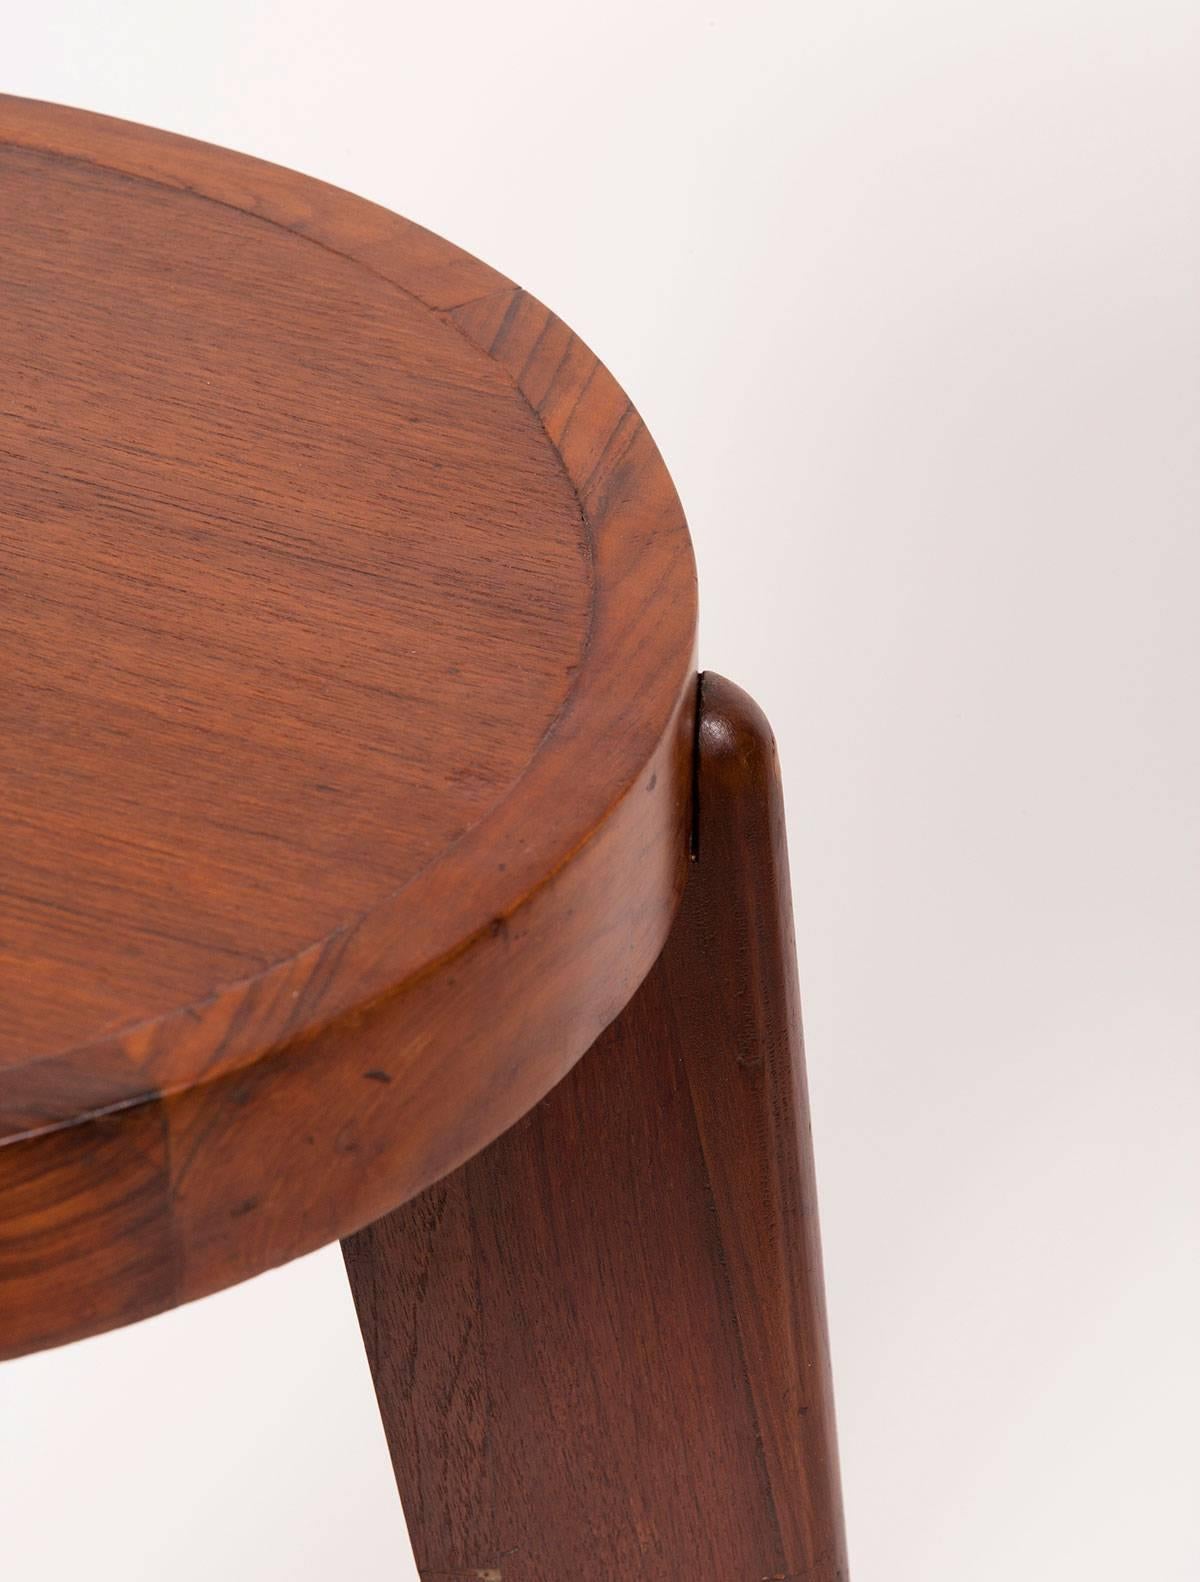 Indian Teak High Stool by Pierre Jeanneret for the City of Chandigarh